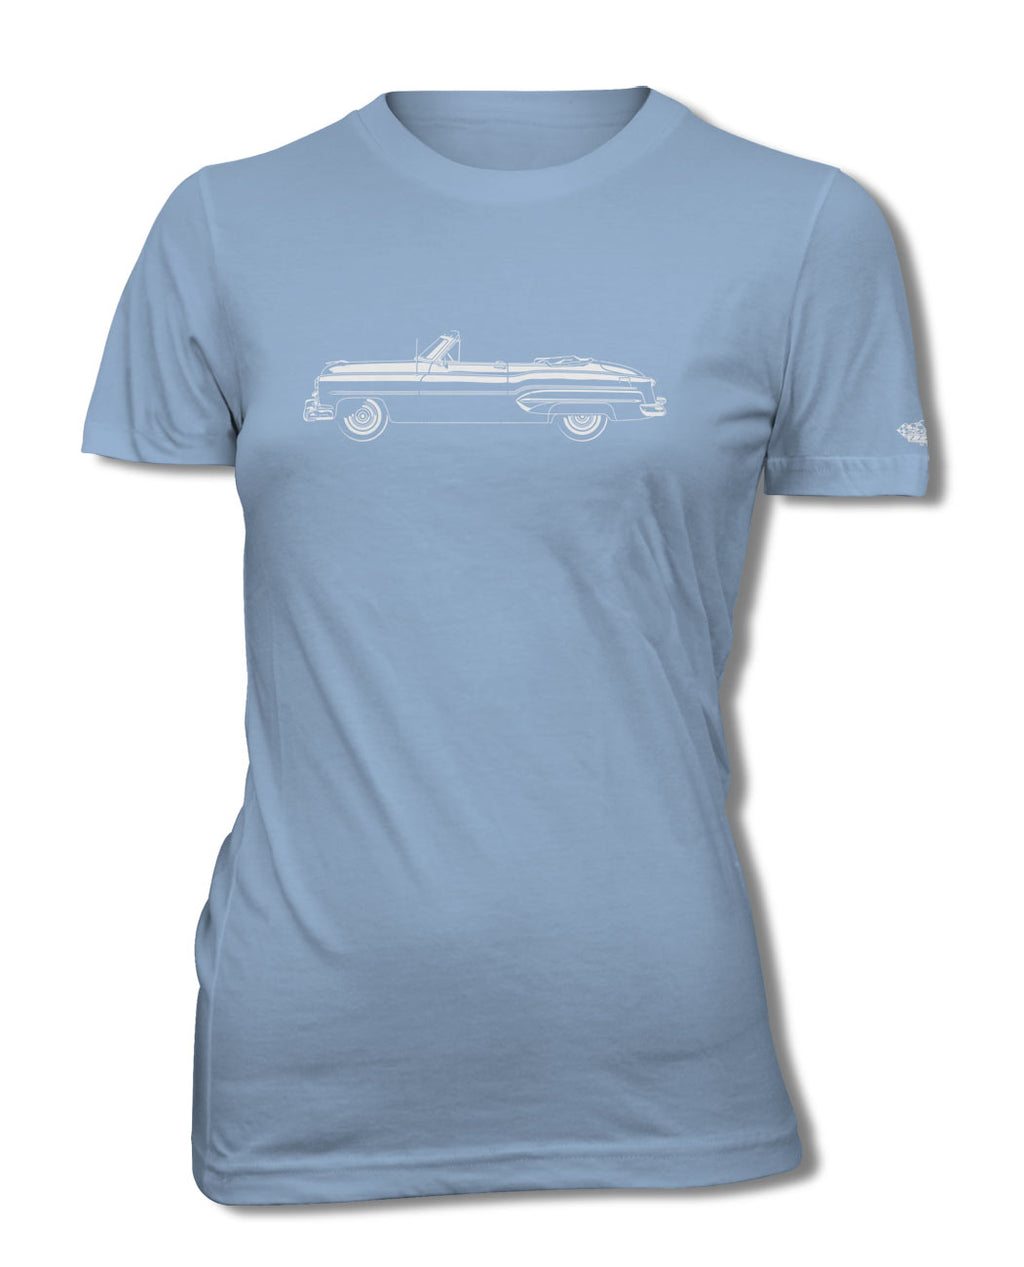 1951 Oldsmobile 98 Deluxe Convertible T-Shirt - Women - Side View